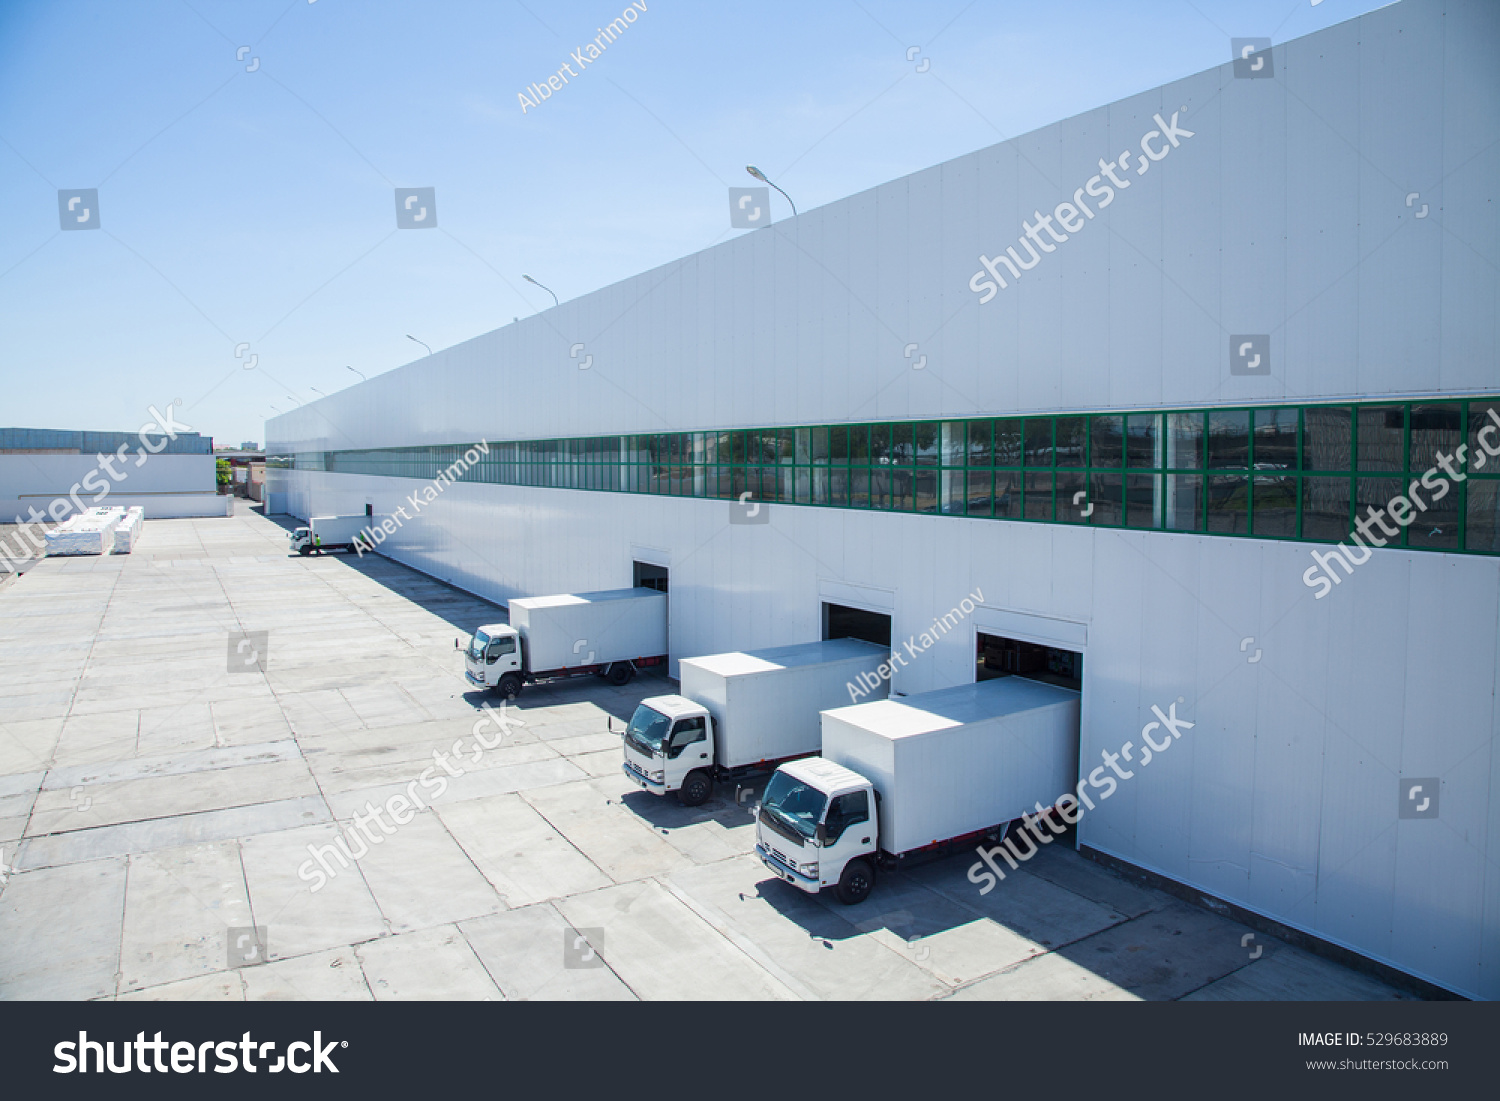 facade of an industrial building and warehouse with freight cars in length #529683889